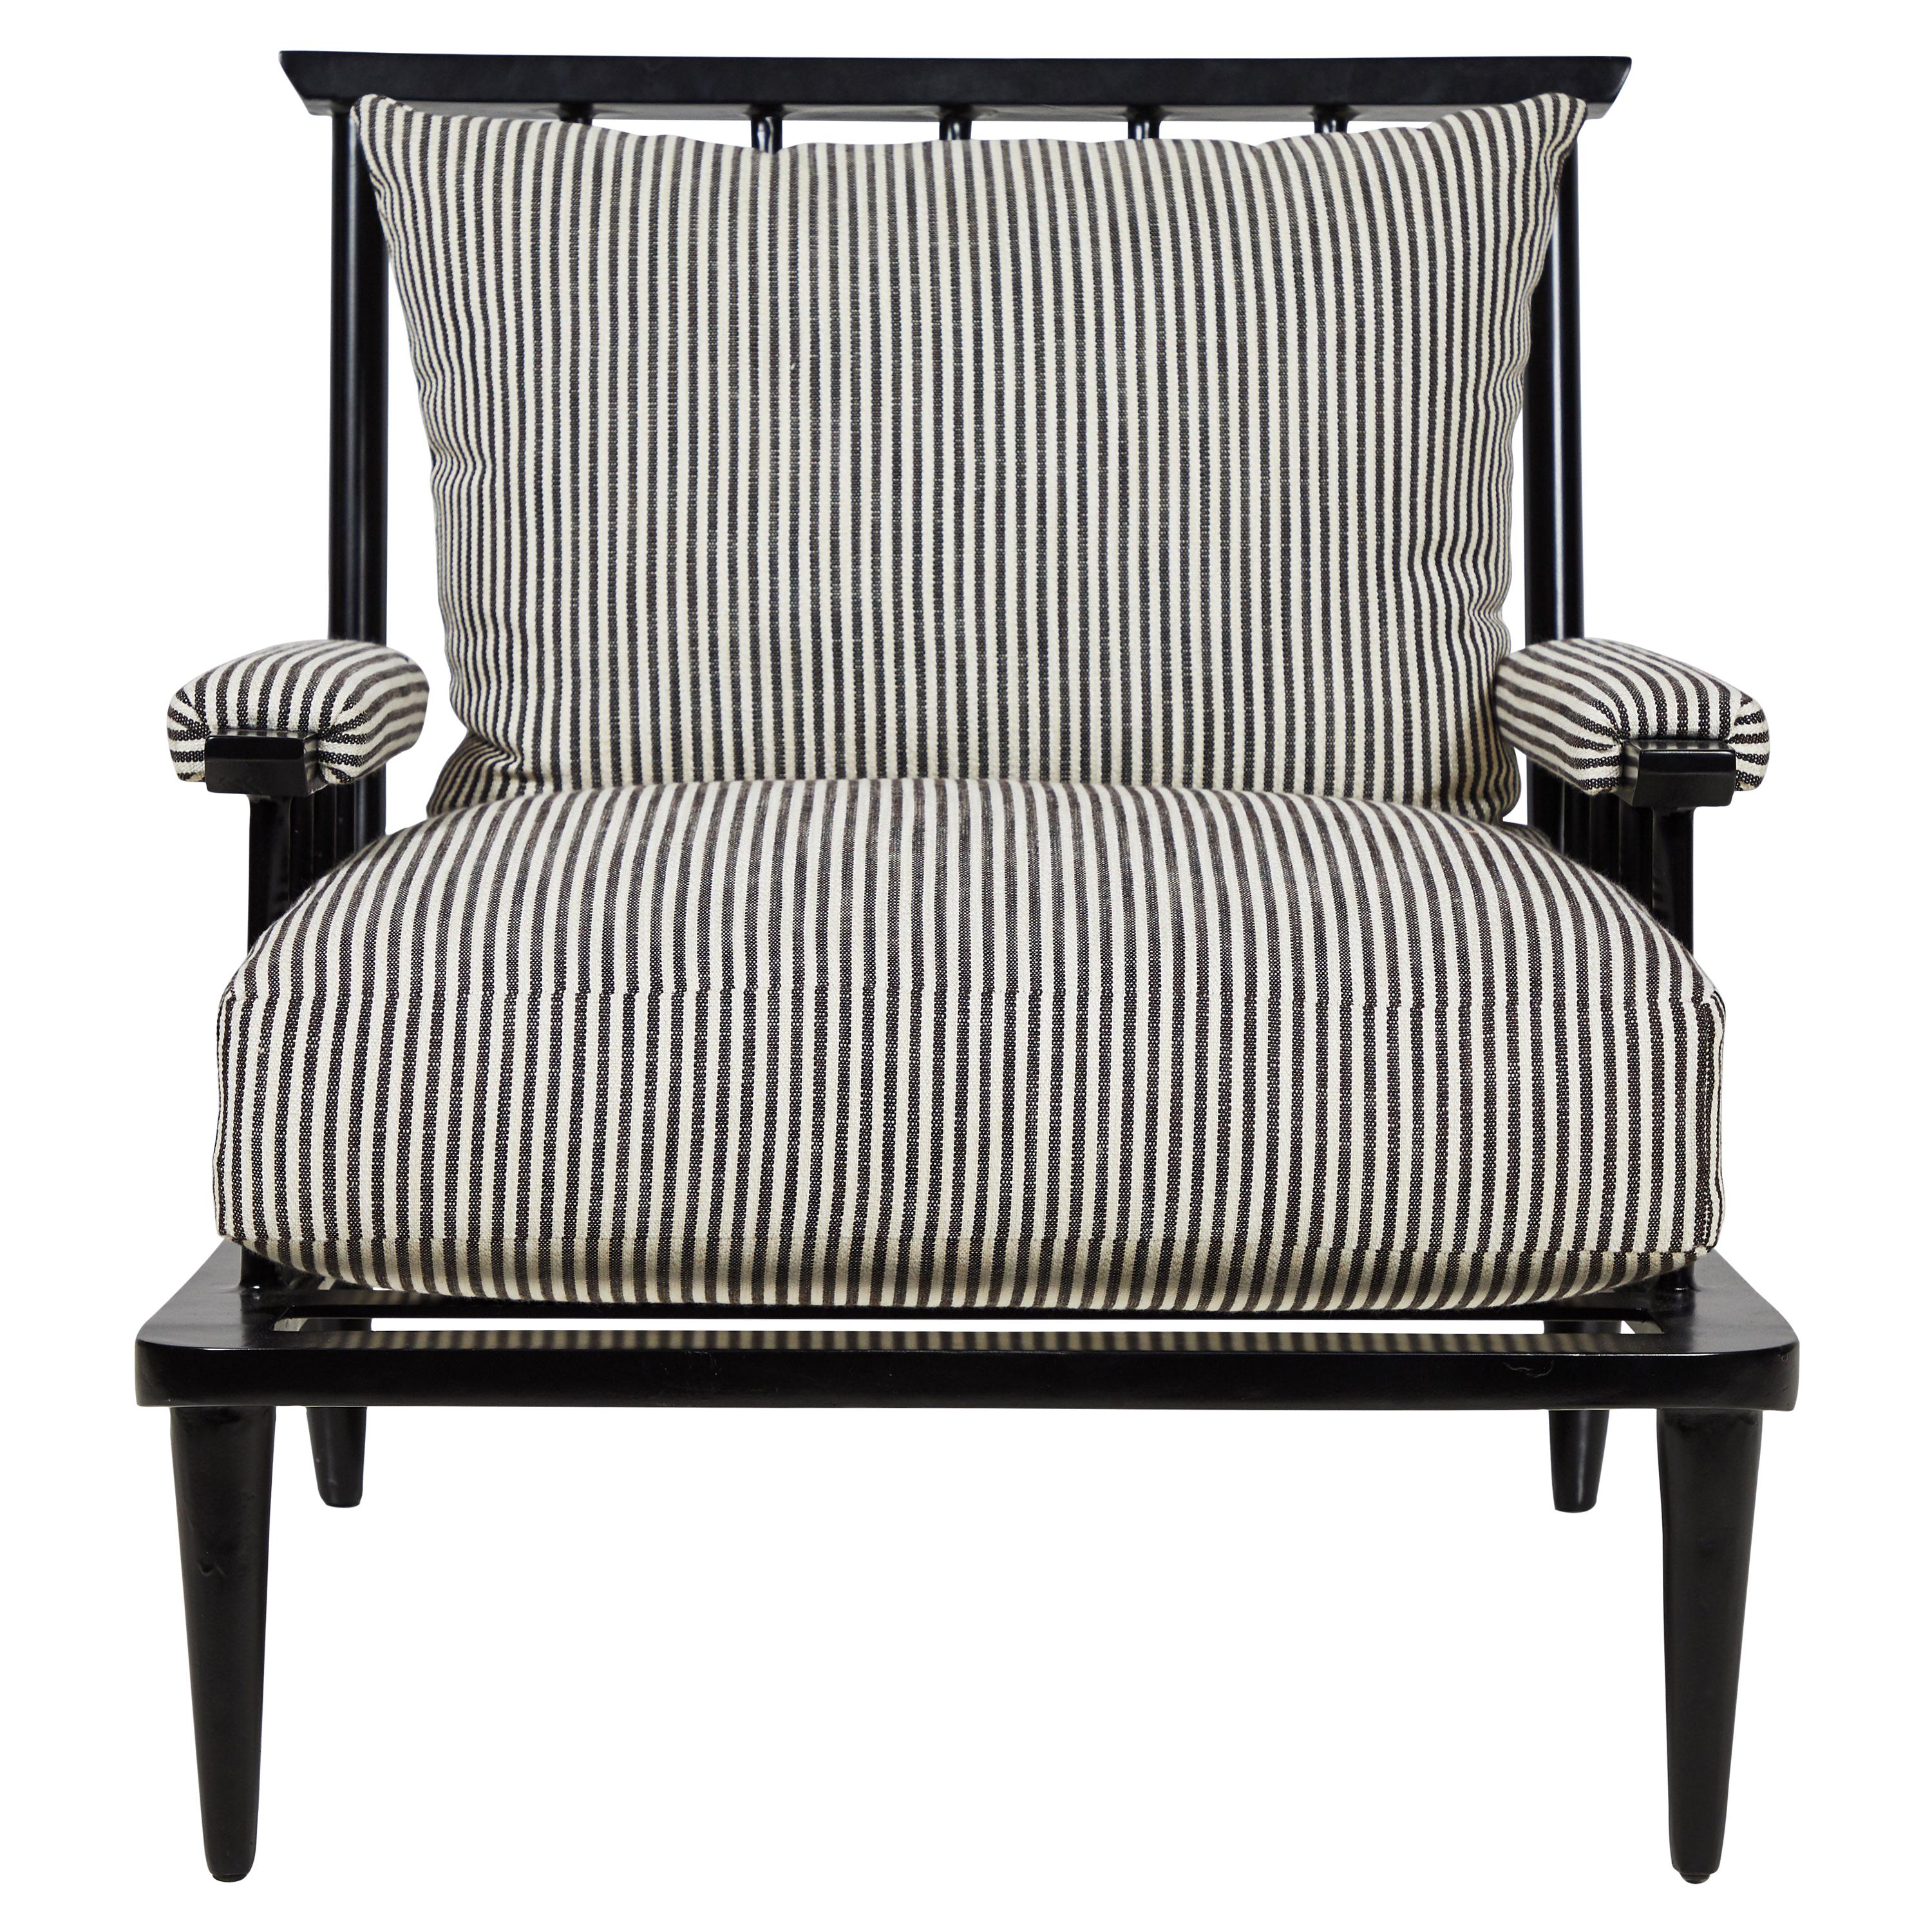 Nickey Kehoe Collection Outdoor Schwarz Metall Spindel Lounge Stuhl